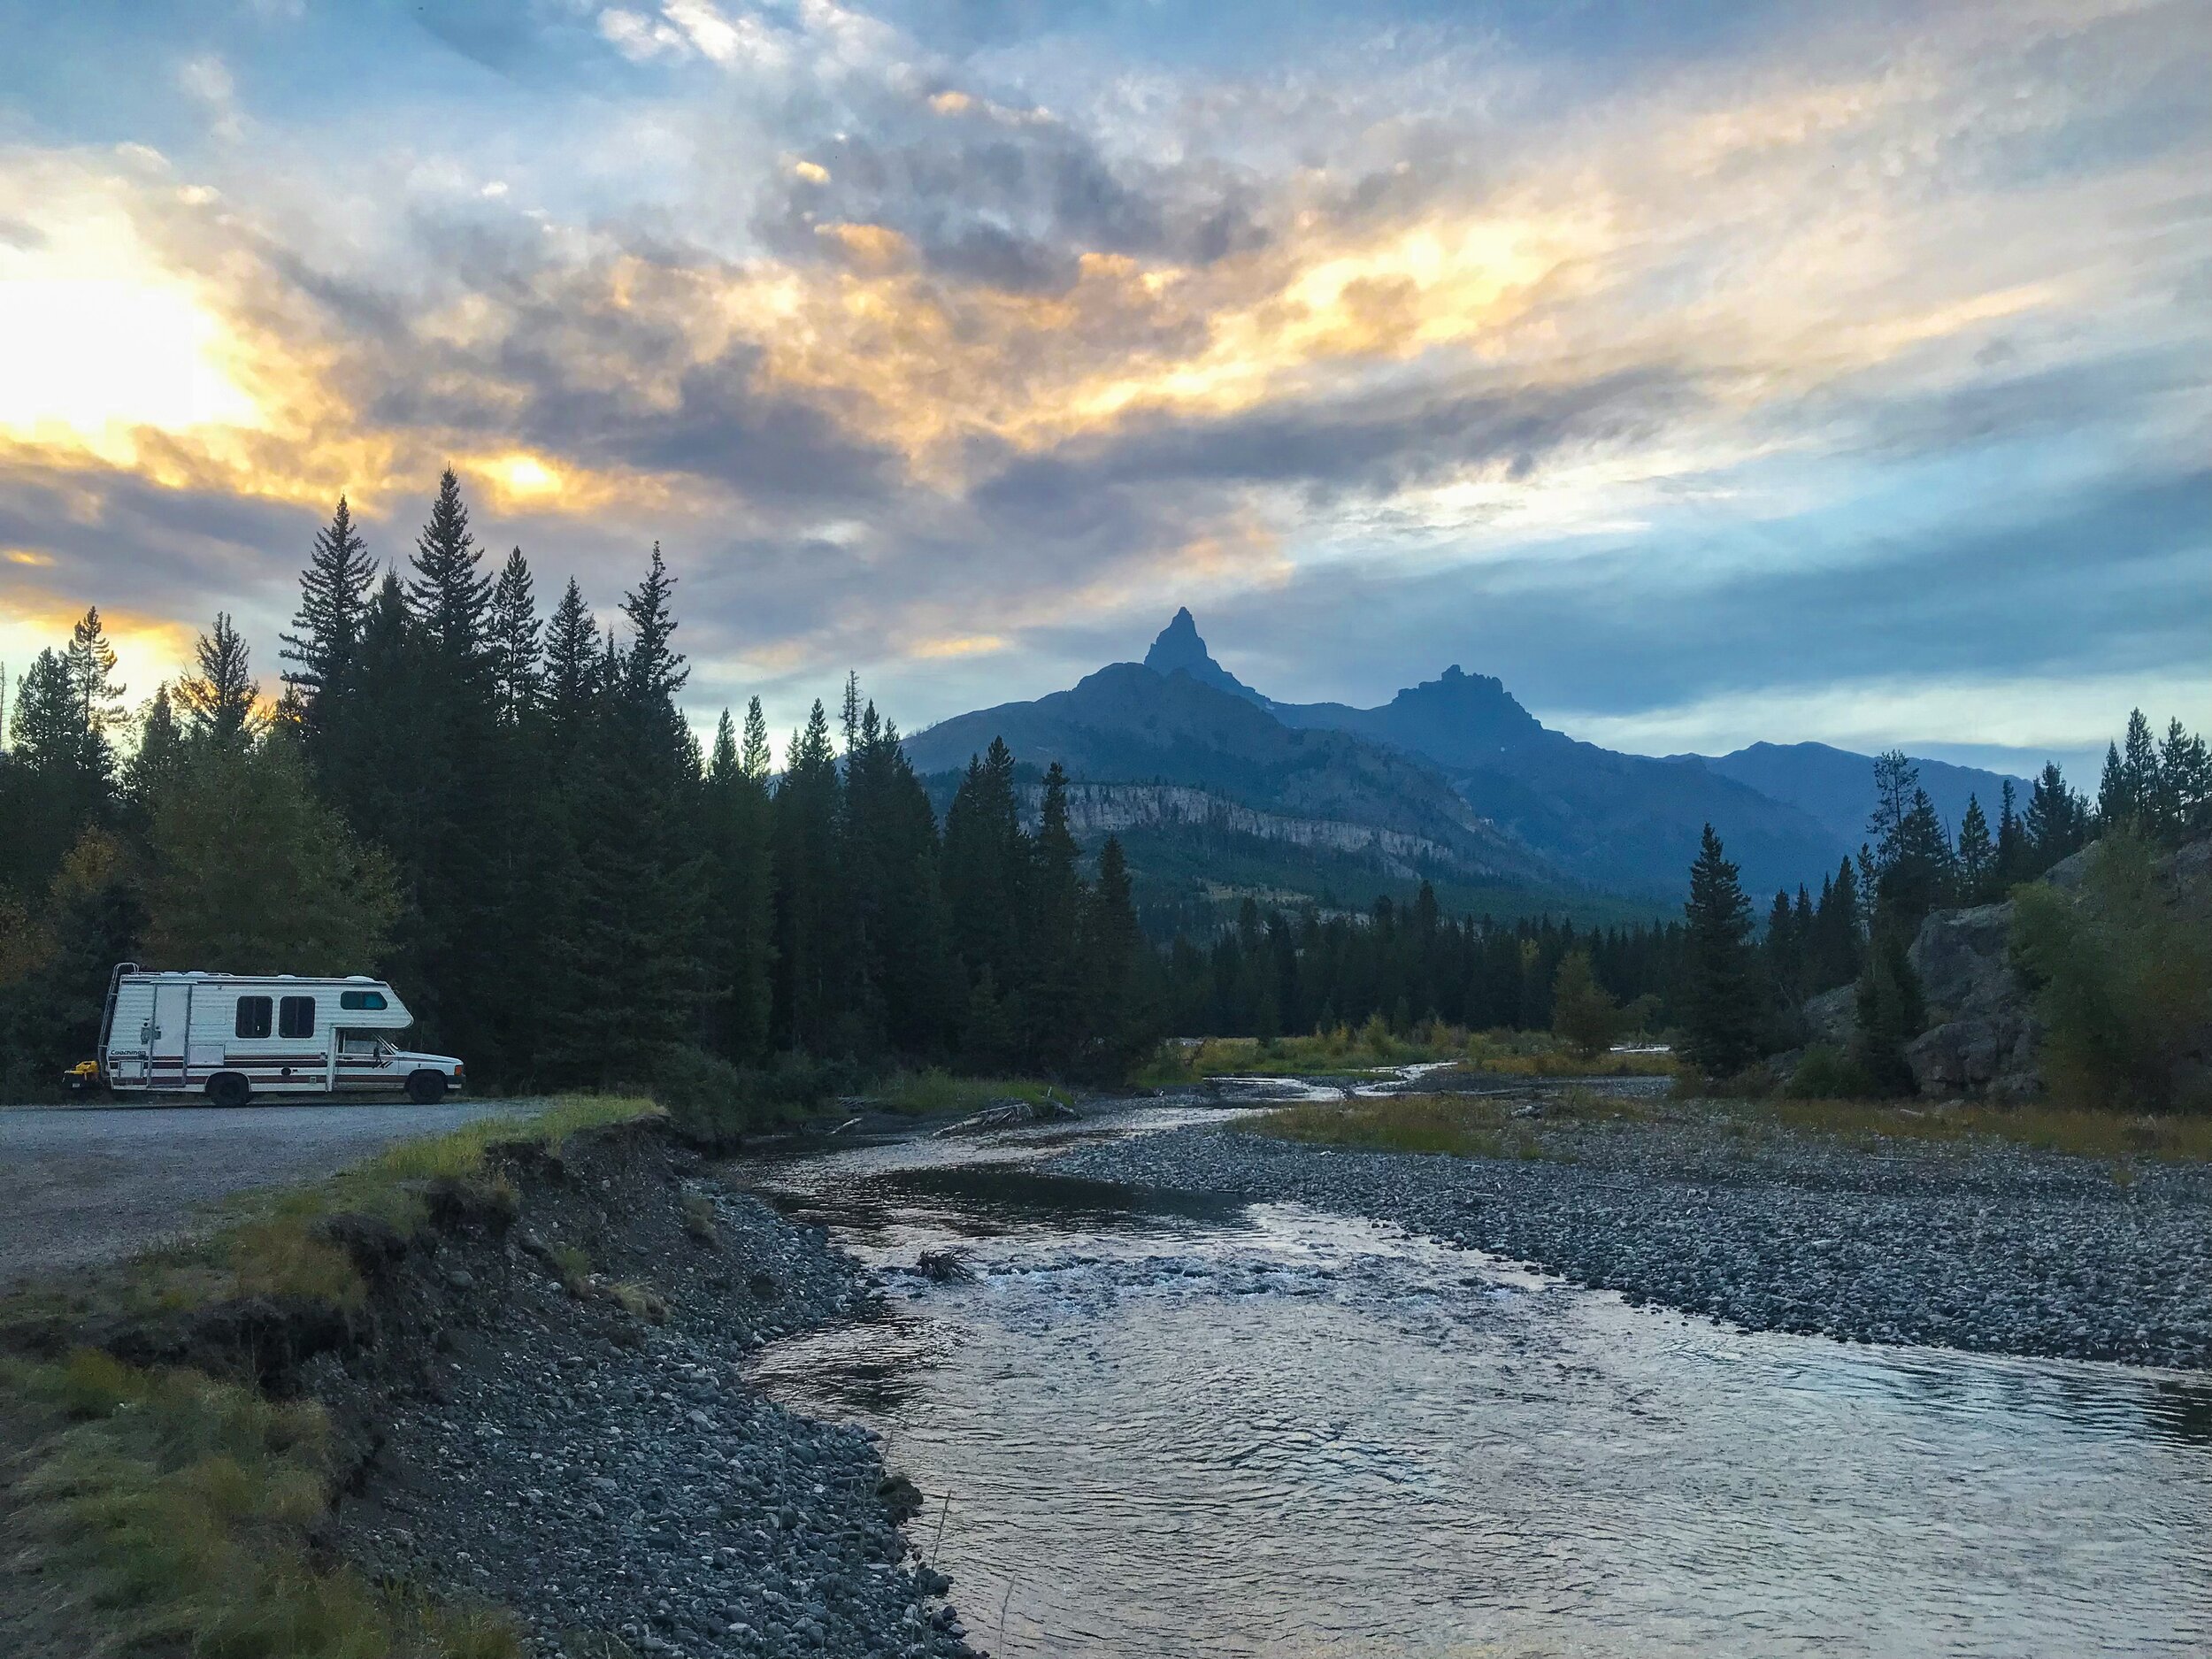 Another favorite free boondocking site of ours. This was reported as being a great place to watch Grizzlies. Although we didn't spot any, we took the necessary boondocking safety precautions to avoid any dangerous situations!